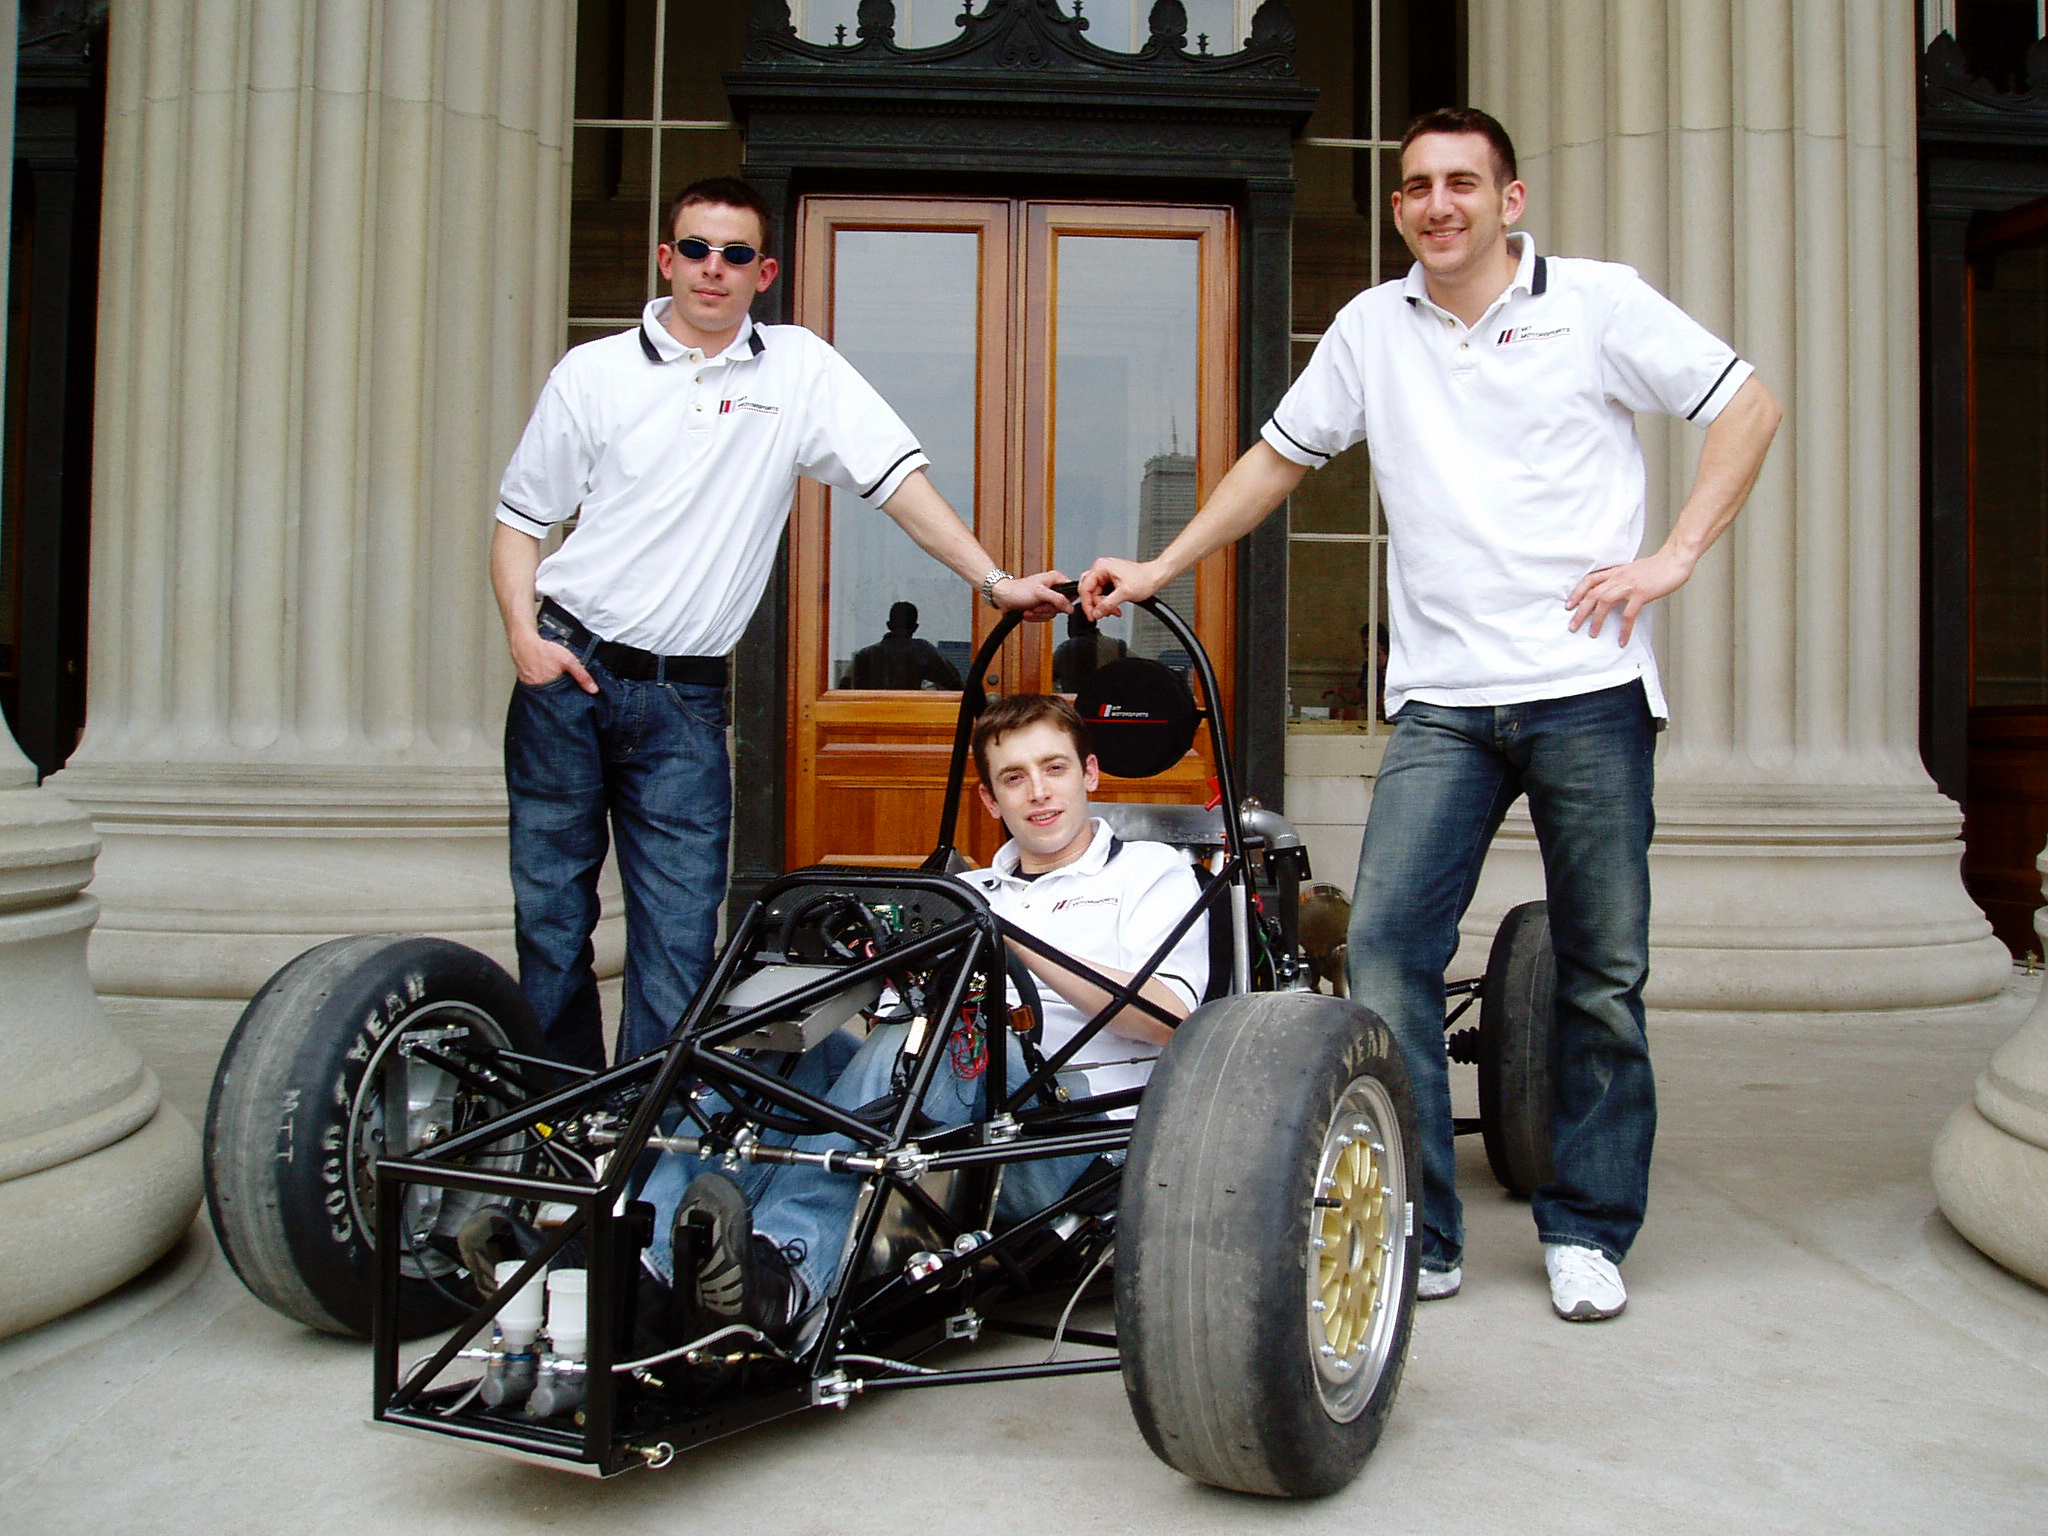 Jim Cuseo SM '05, Richard James ’04, SM ’06, and Joseph Audette ’05 with the MIT Motorsports formula-one style racecar outside the doors of Building 10